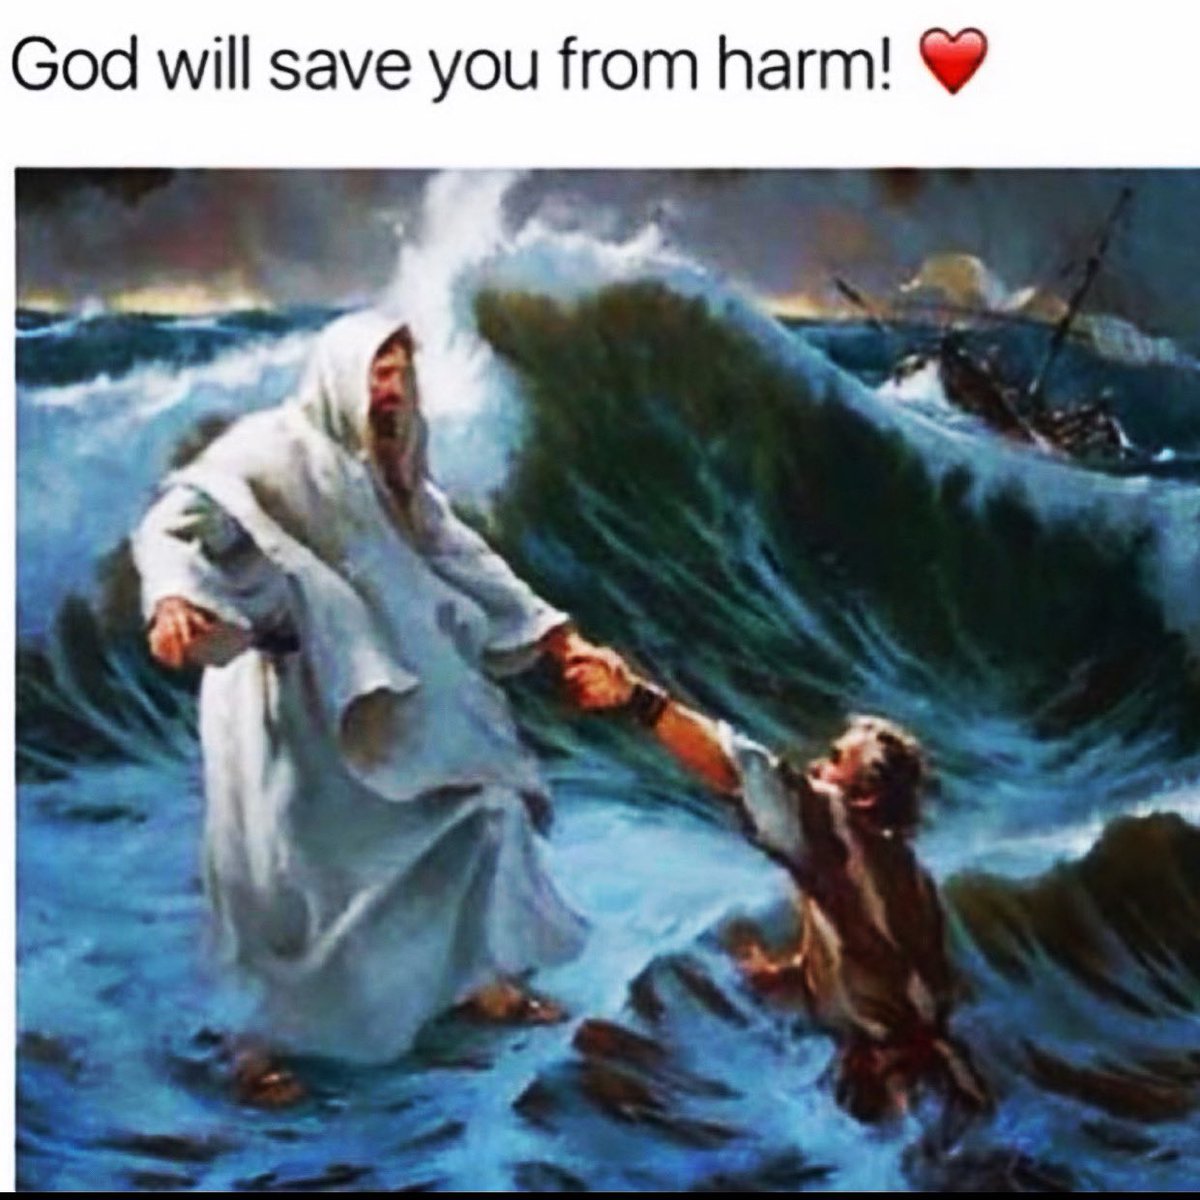 The LORD will keep you from all harm-- he will watch over your life; the LORD will watch over your coming and going both now and forevermore.- Psalm 121:7-8 #protectionofgod

Proverbs 12:21 No harm comes to the godly, but the wicked have their fill of trouble. #godsprotection